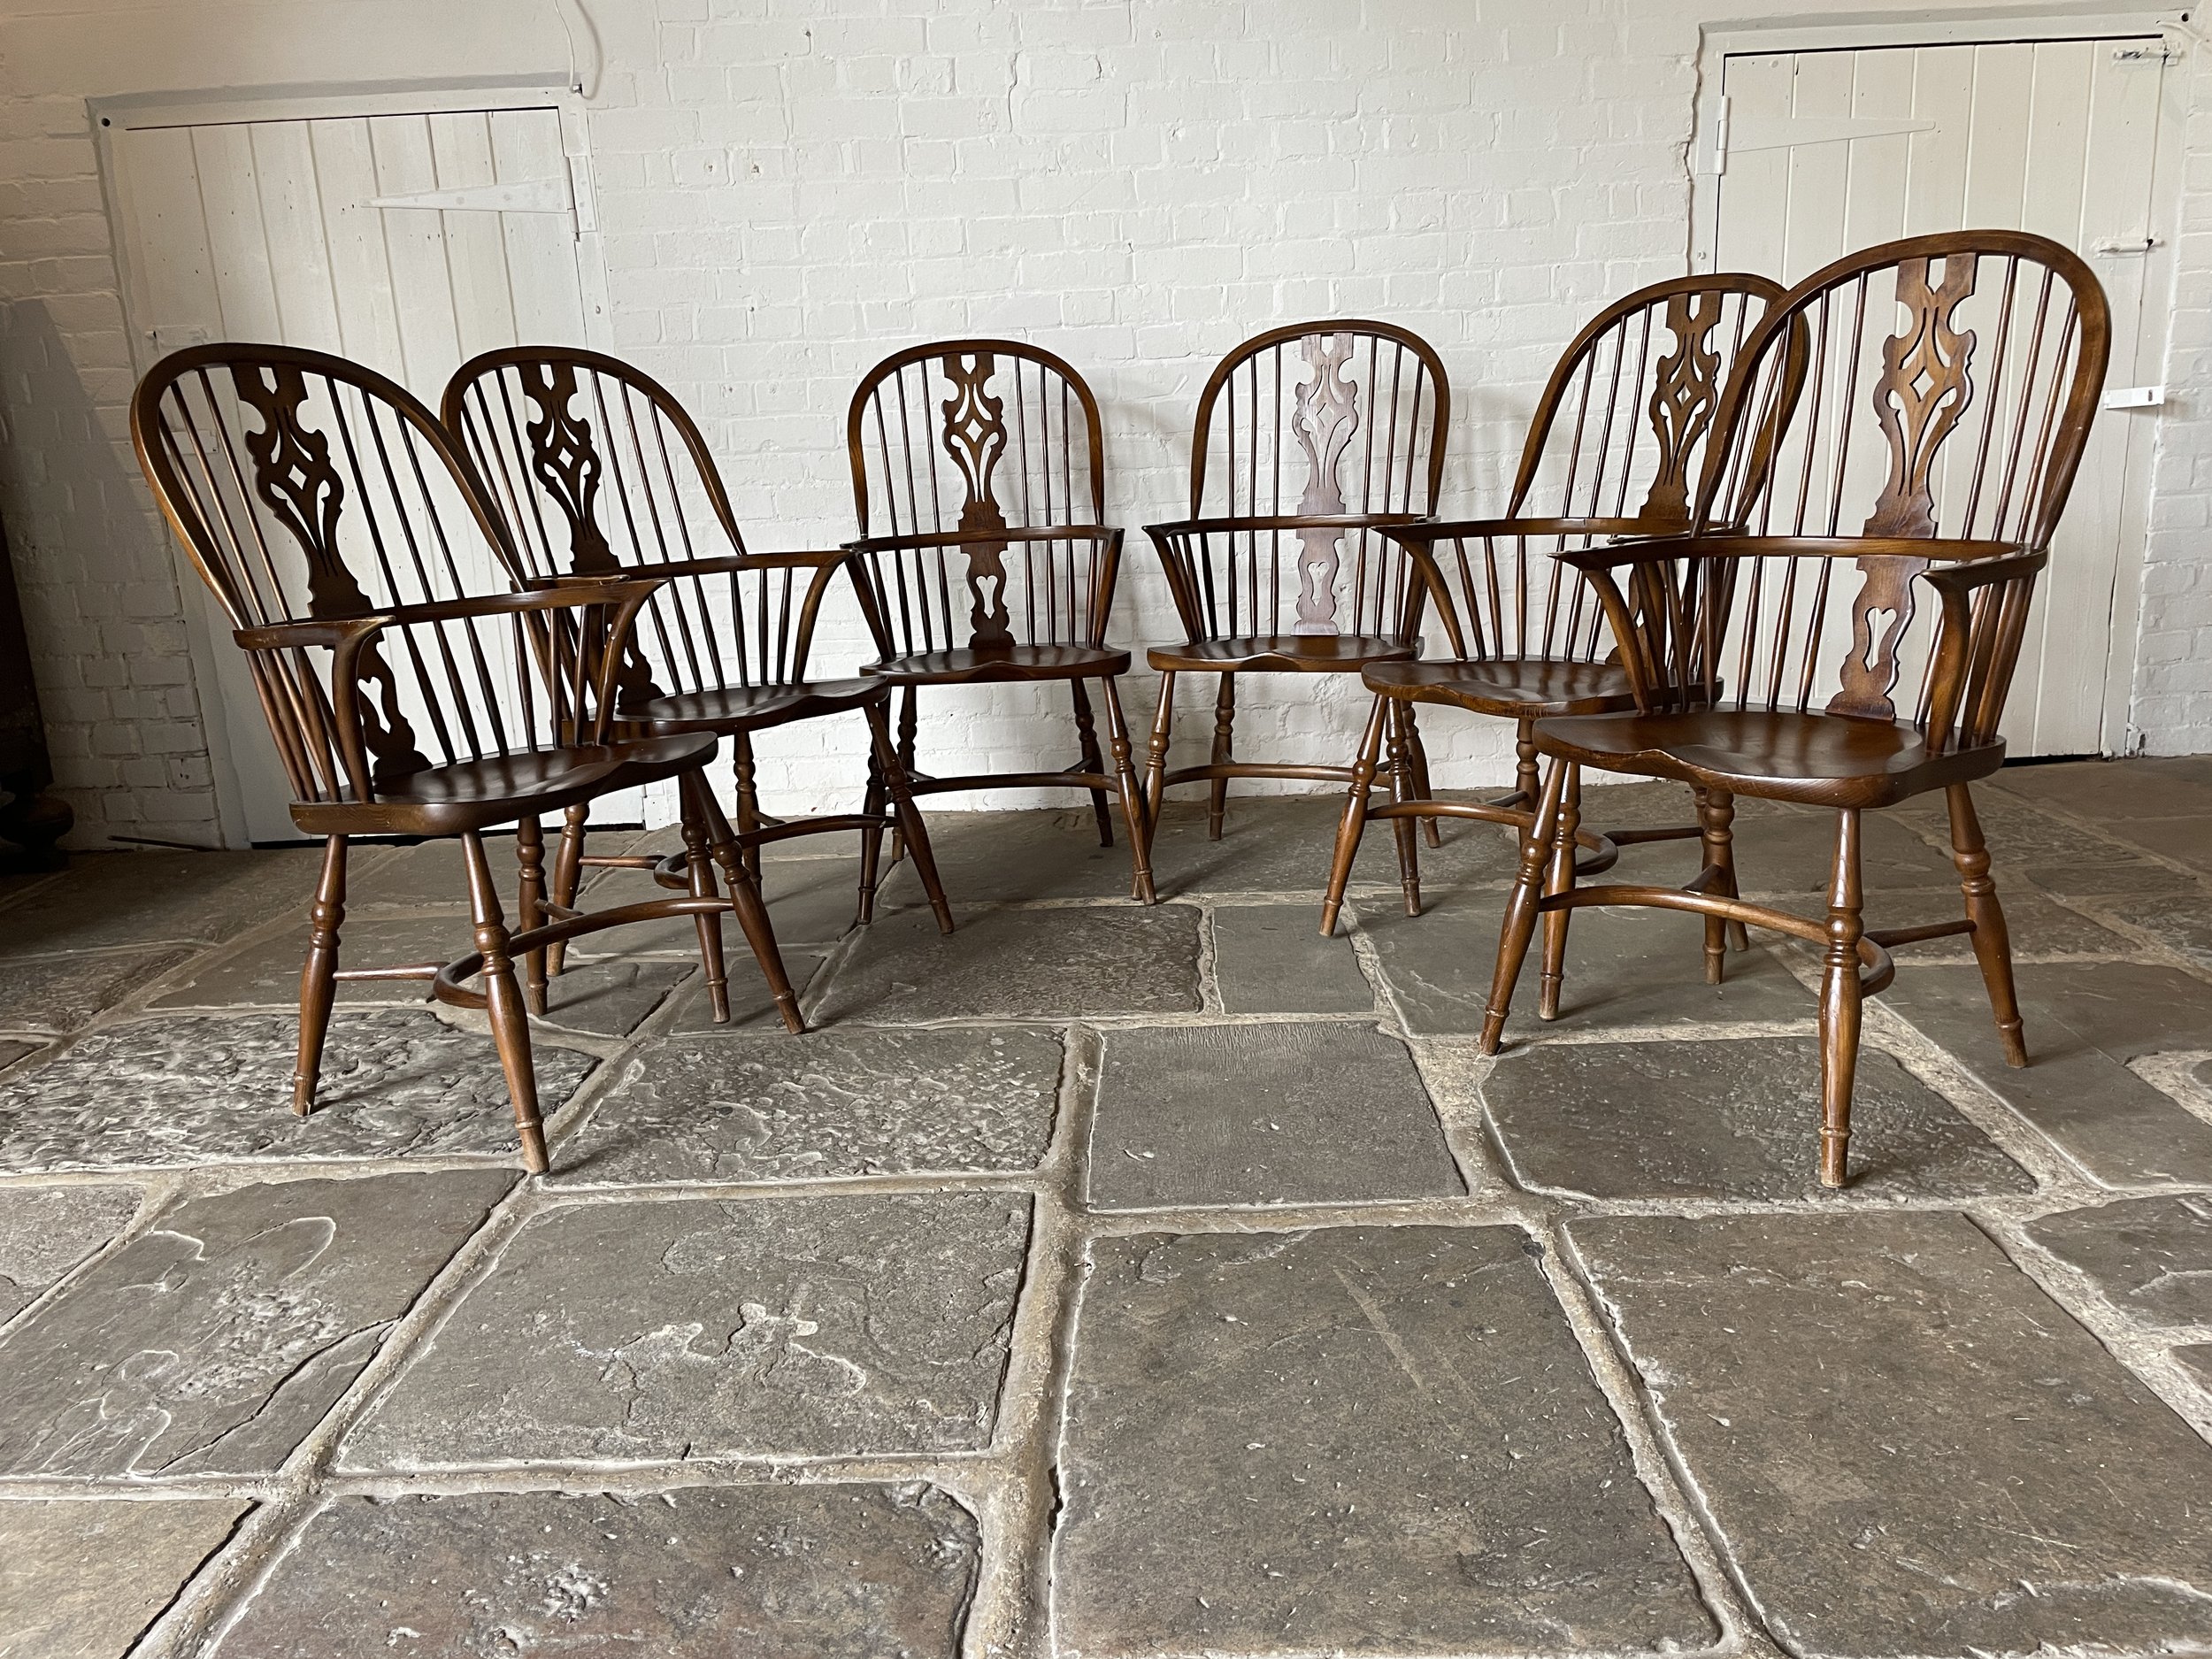 Set of 6 Windsor Style Chairs - £875